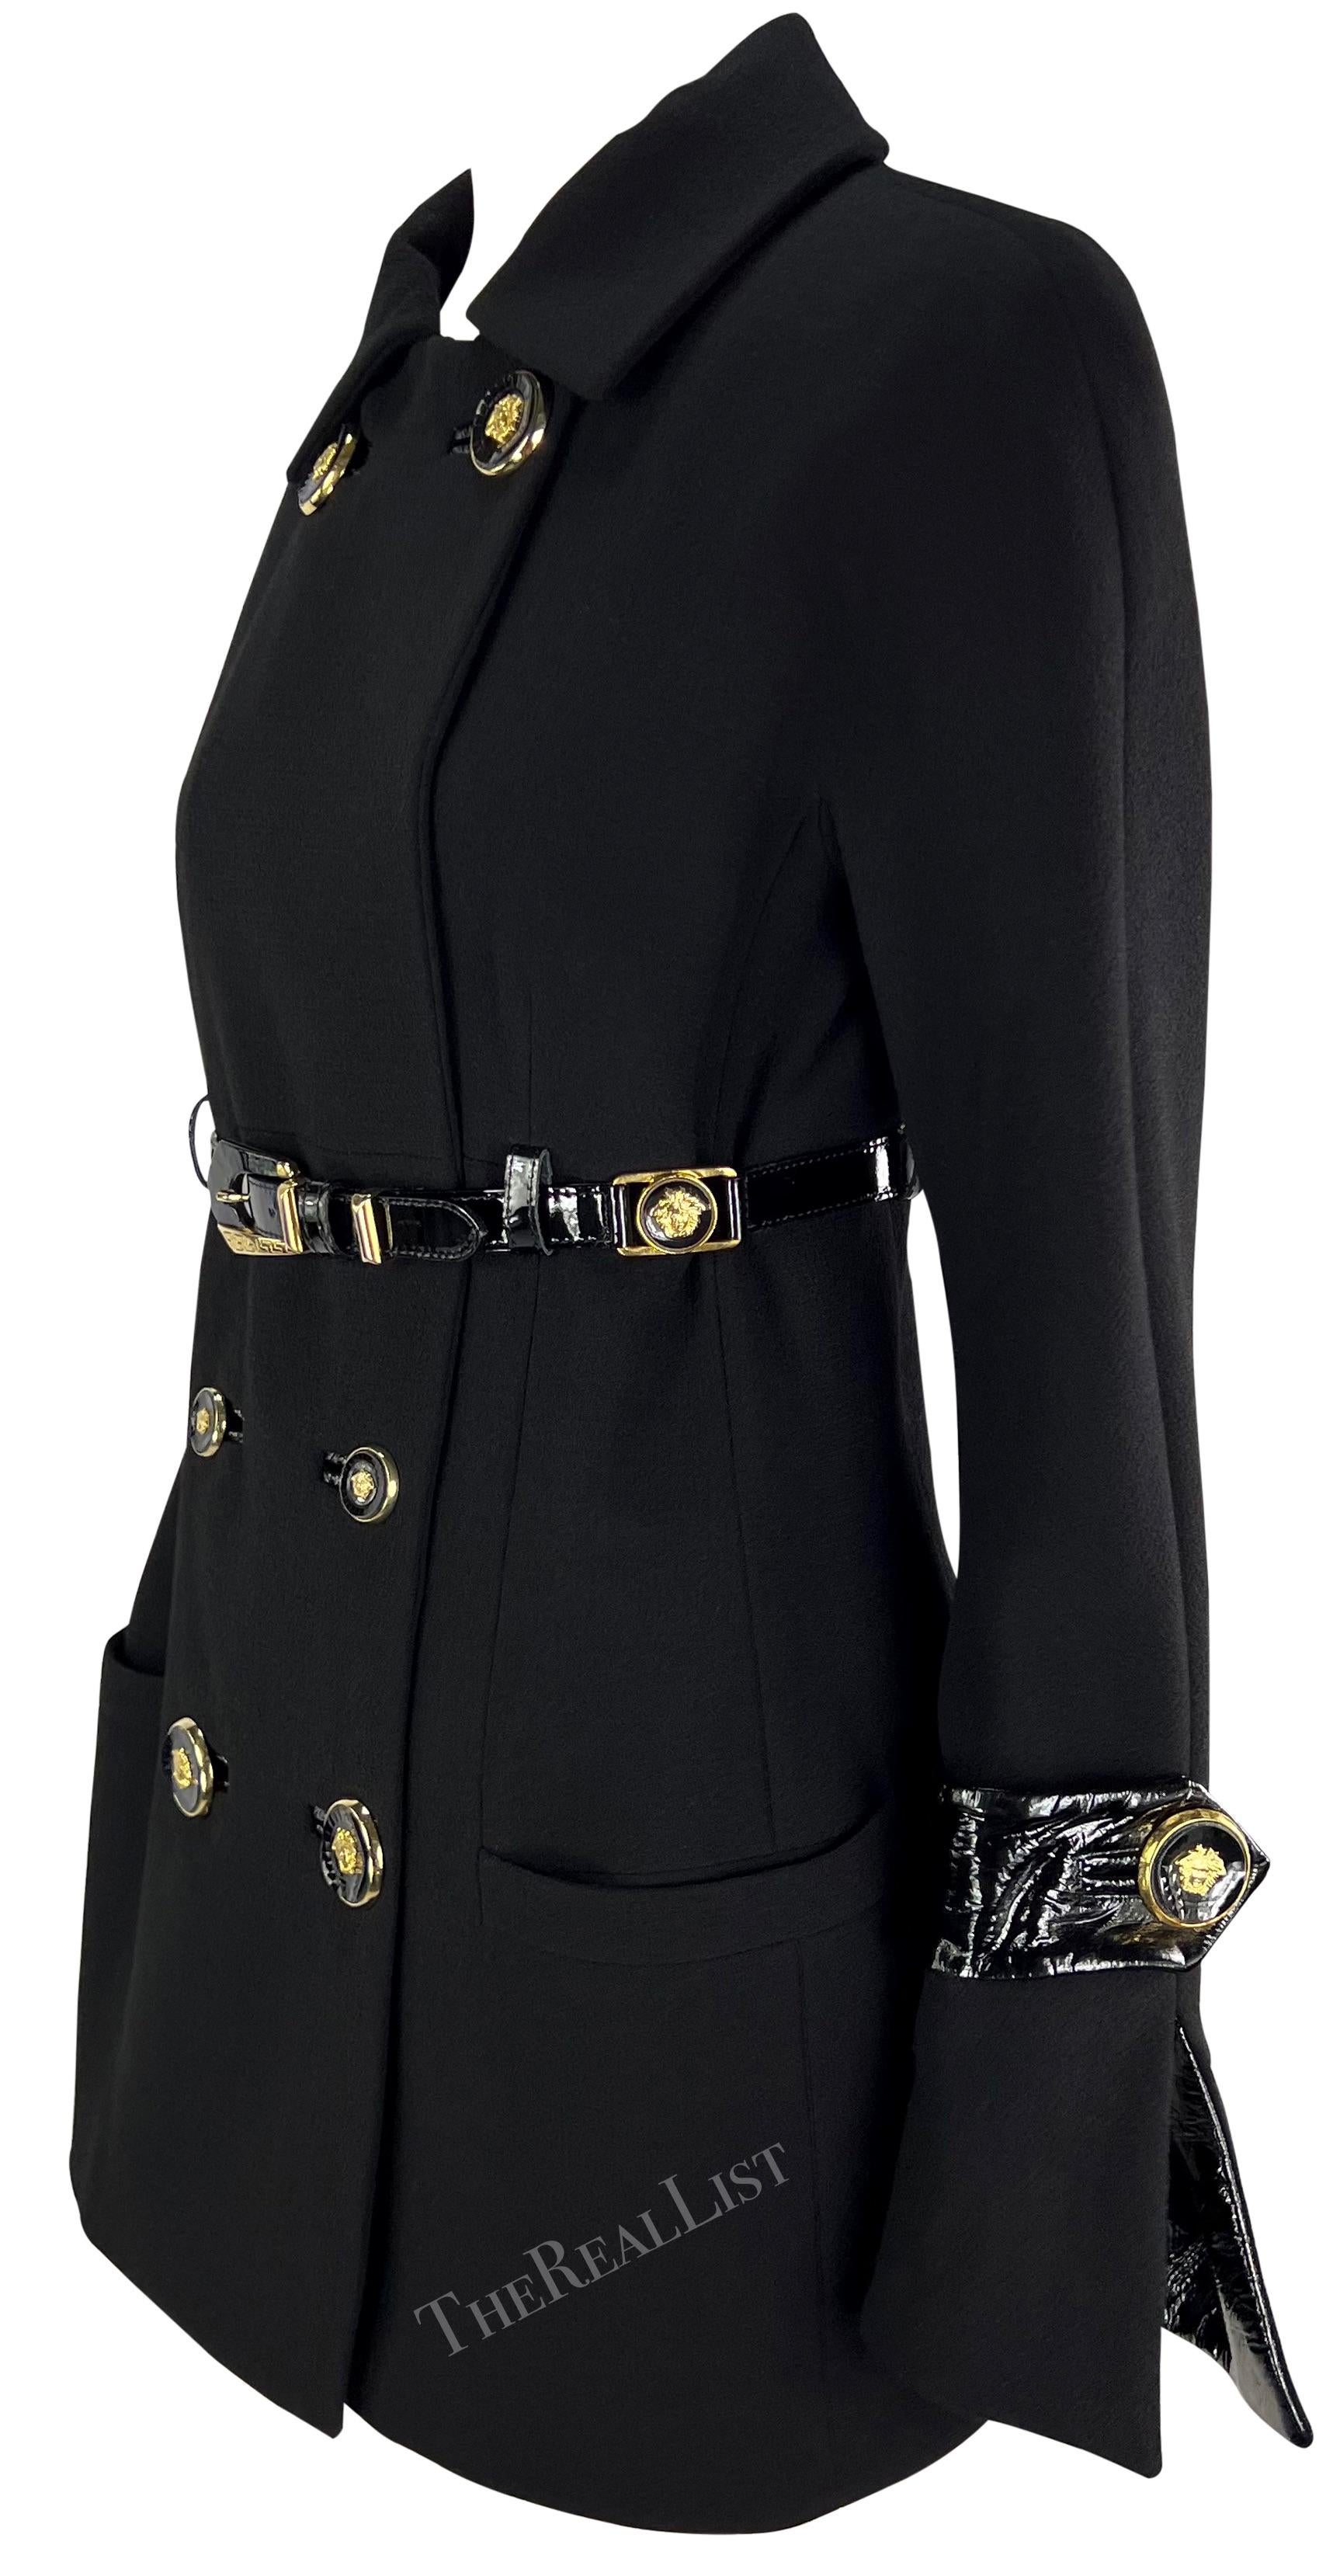 F/W 1994 Gianni Versace Black Patent Leather Belt Gold Medusa Jacket In Excellent Condition For Sale In West Hollywood, CA